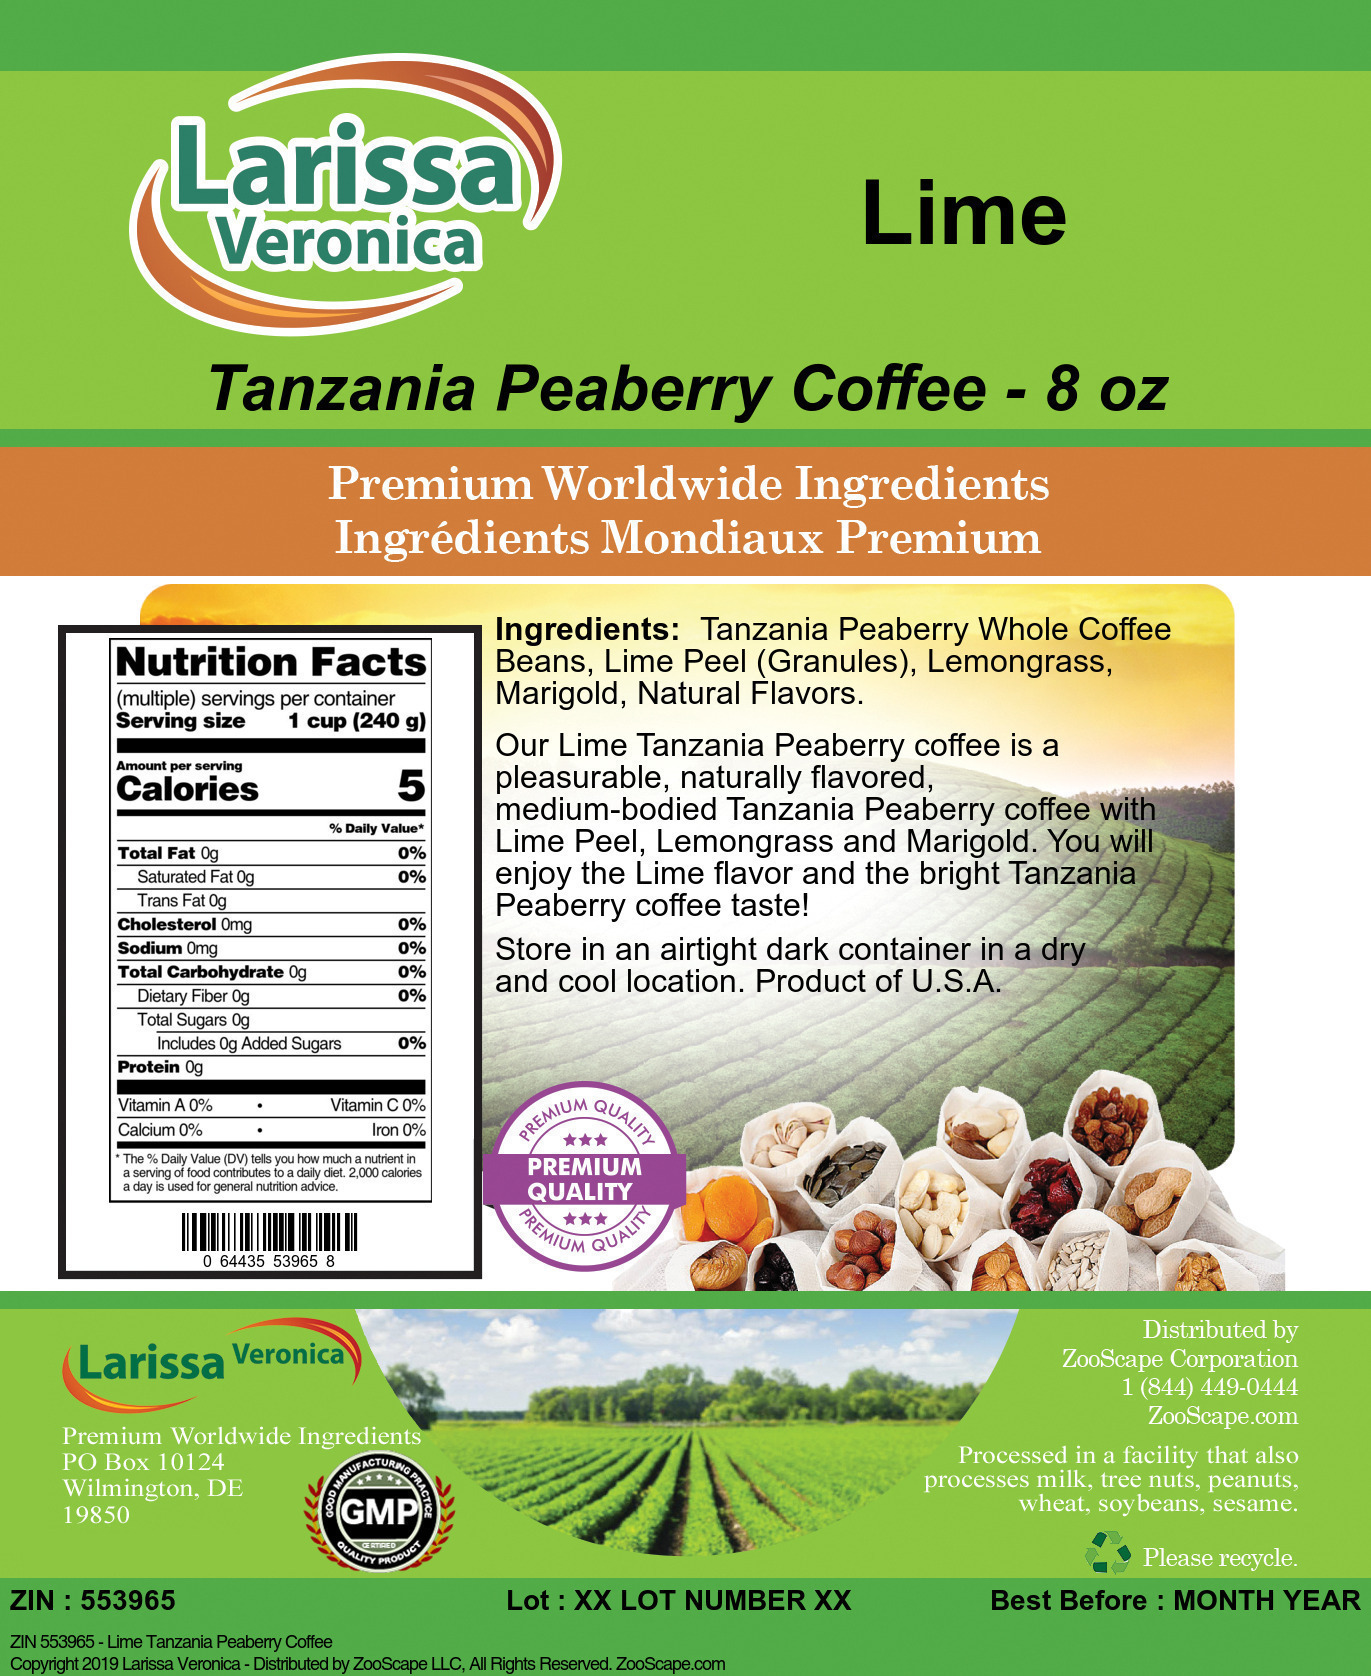 Lime Tanzania Peaberry Coffee - Label